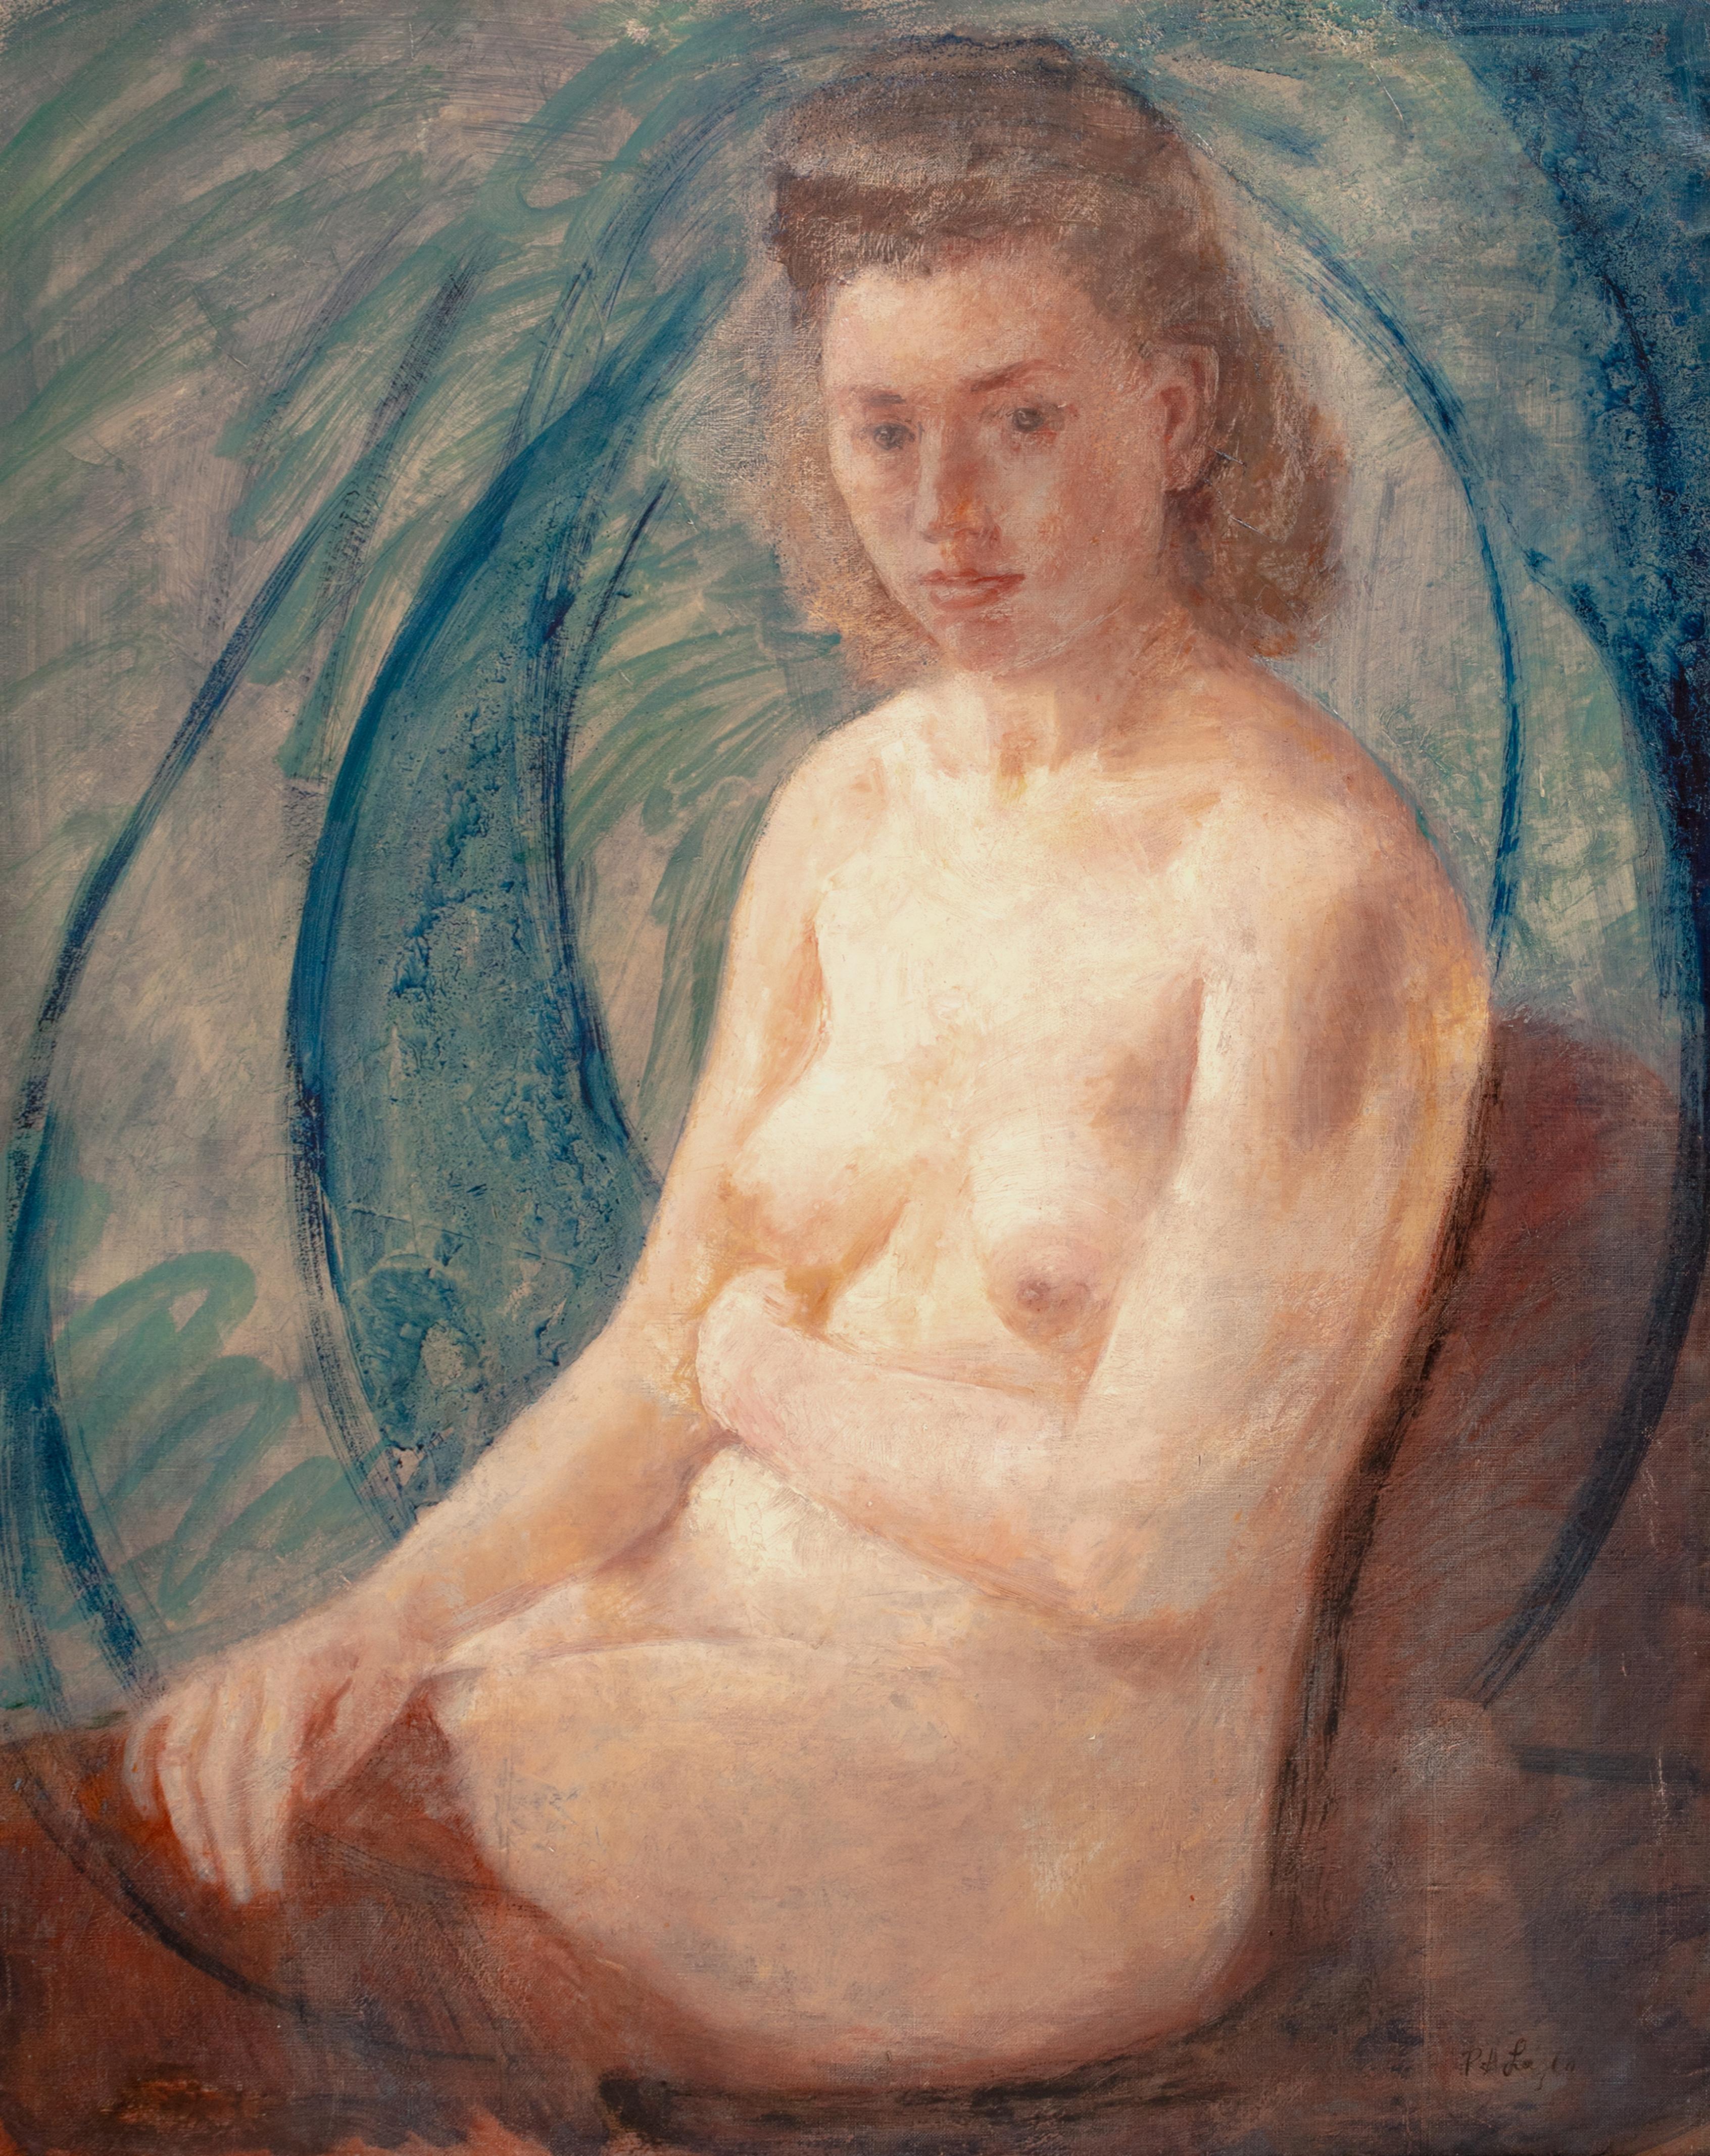 Portrait Of A Nude Lady, circa 1900

by Philip de László (1869–1937) sales to $280,000

Large 19th Century English portrait of a nude lady seated, oil on canvas by Philip de Laszlo. Excellent quality and condition three quarter length seated nude